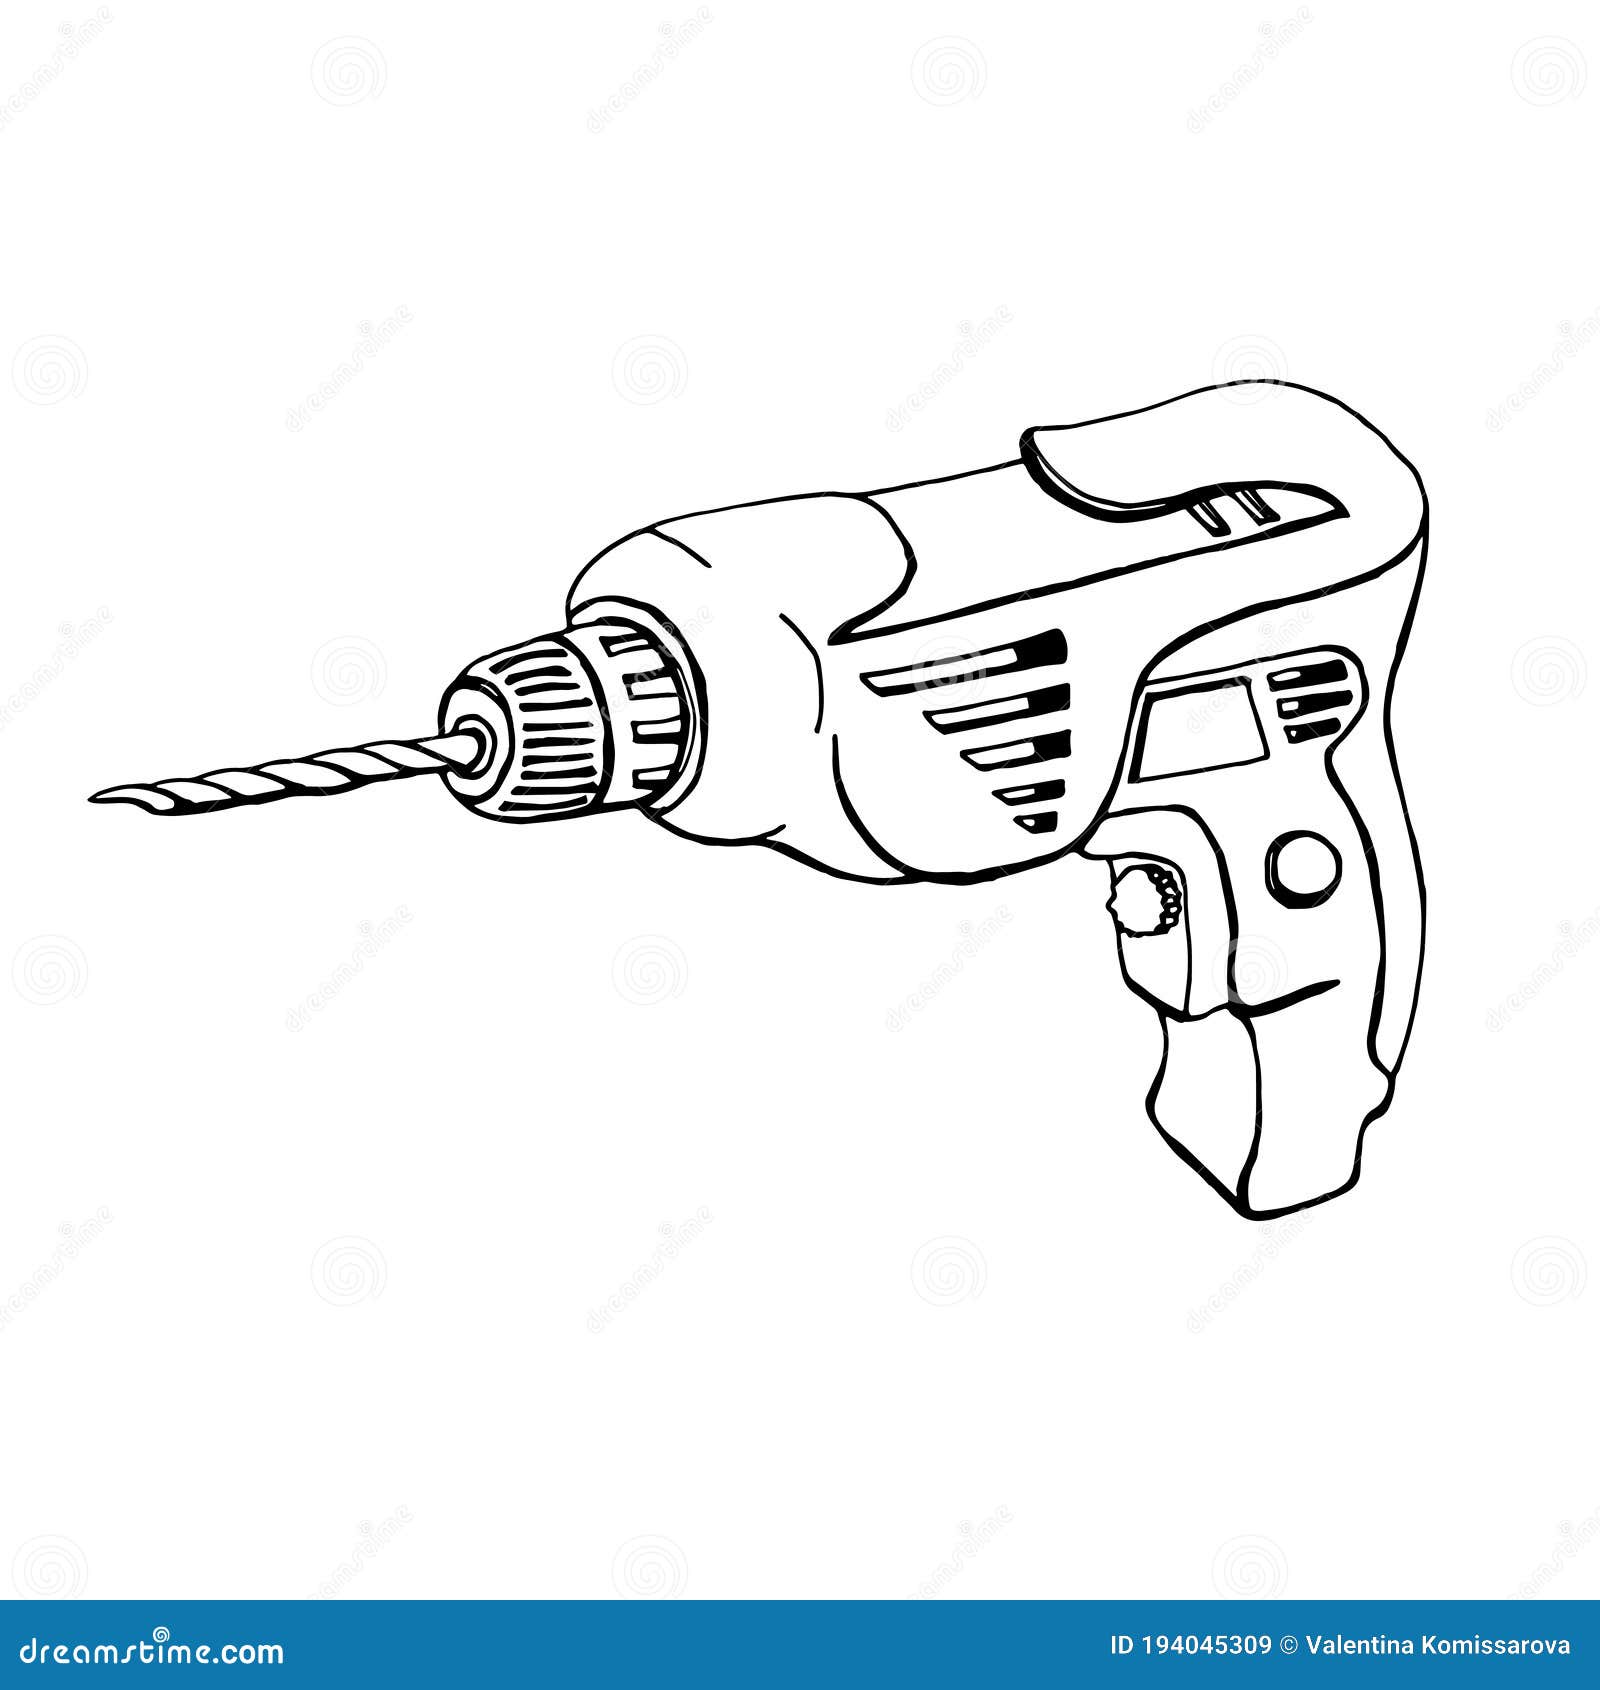 Vector Illustration of a Hand-held Cordless Drill. Stock Vector ...